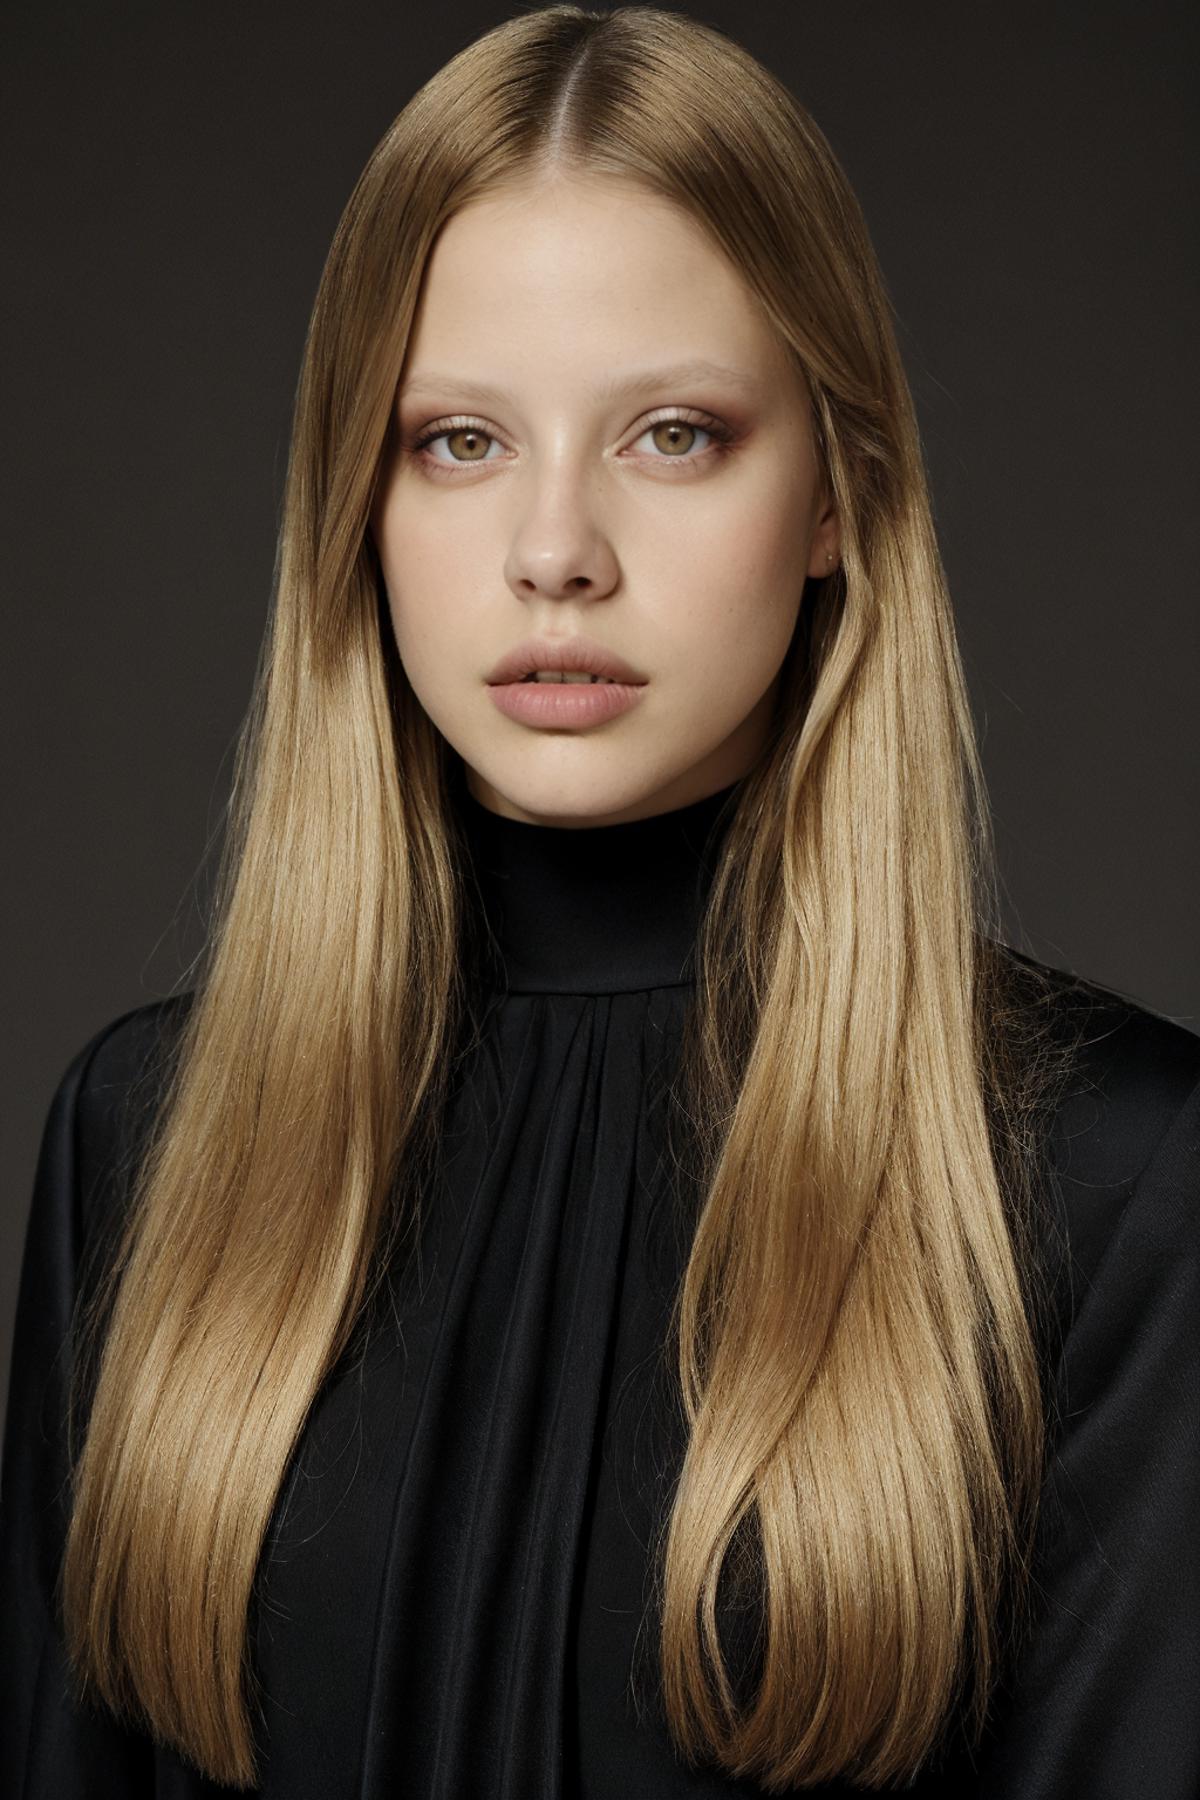 Mia Goth (actress) image by dbst17